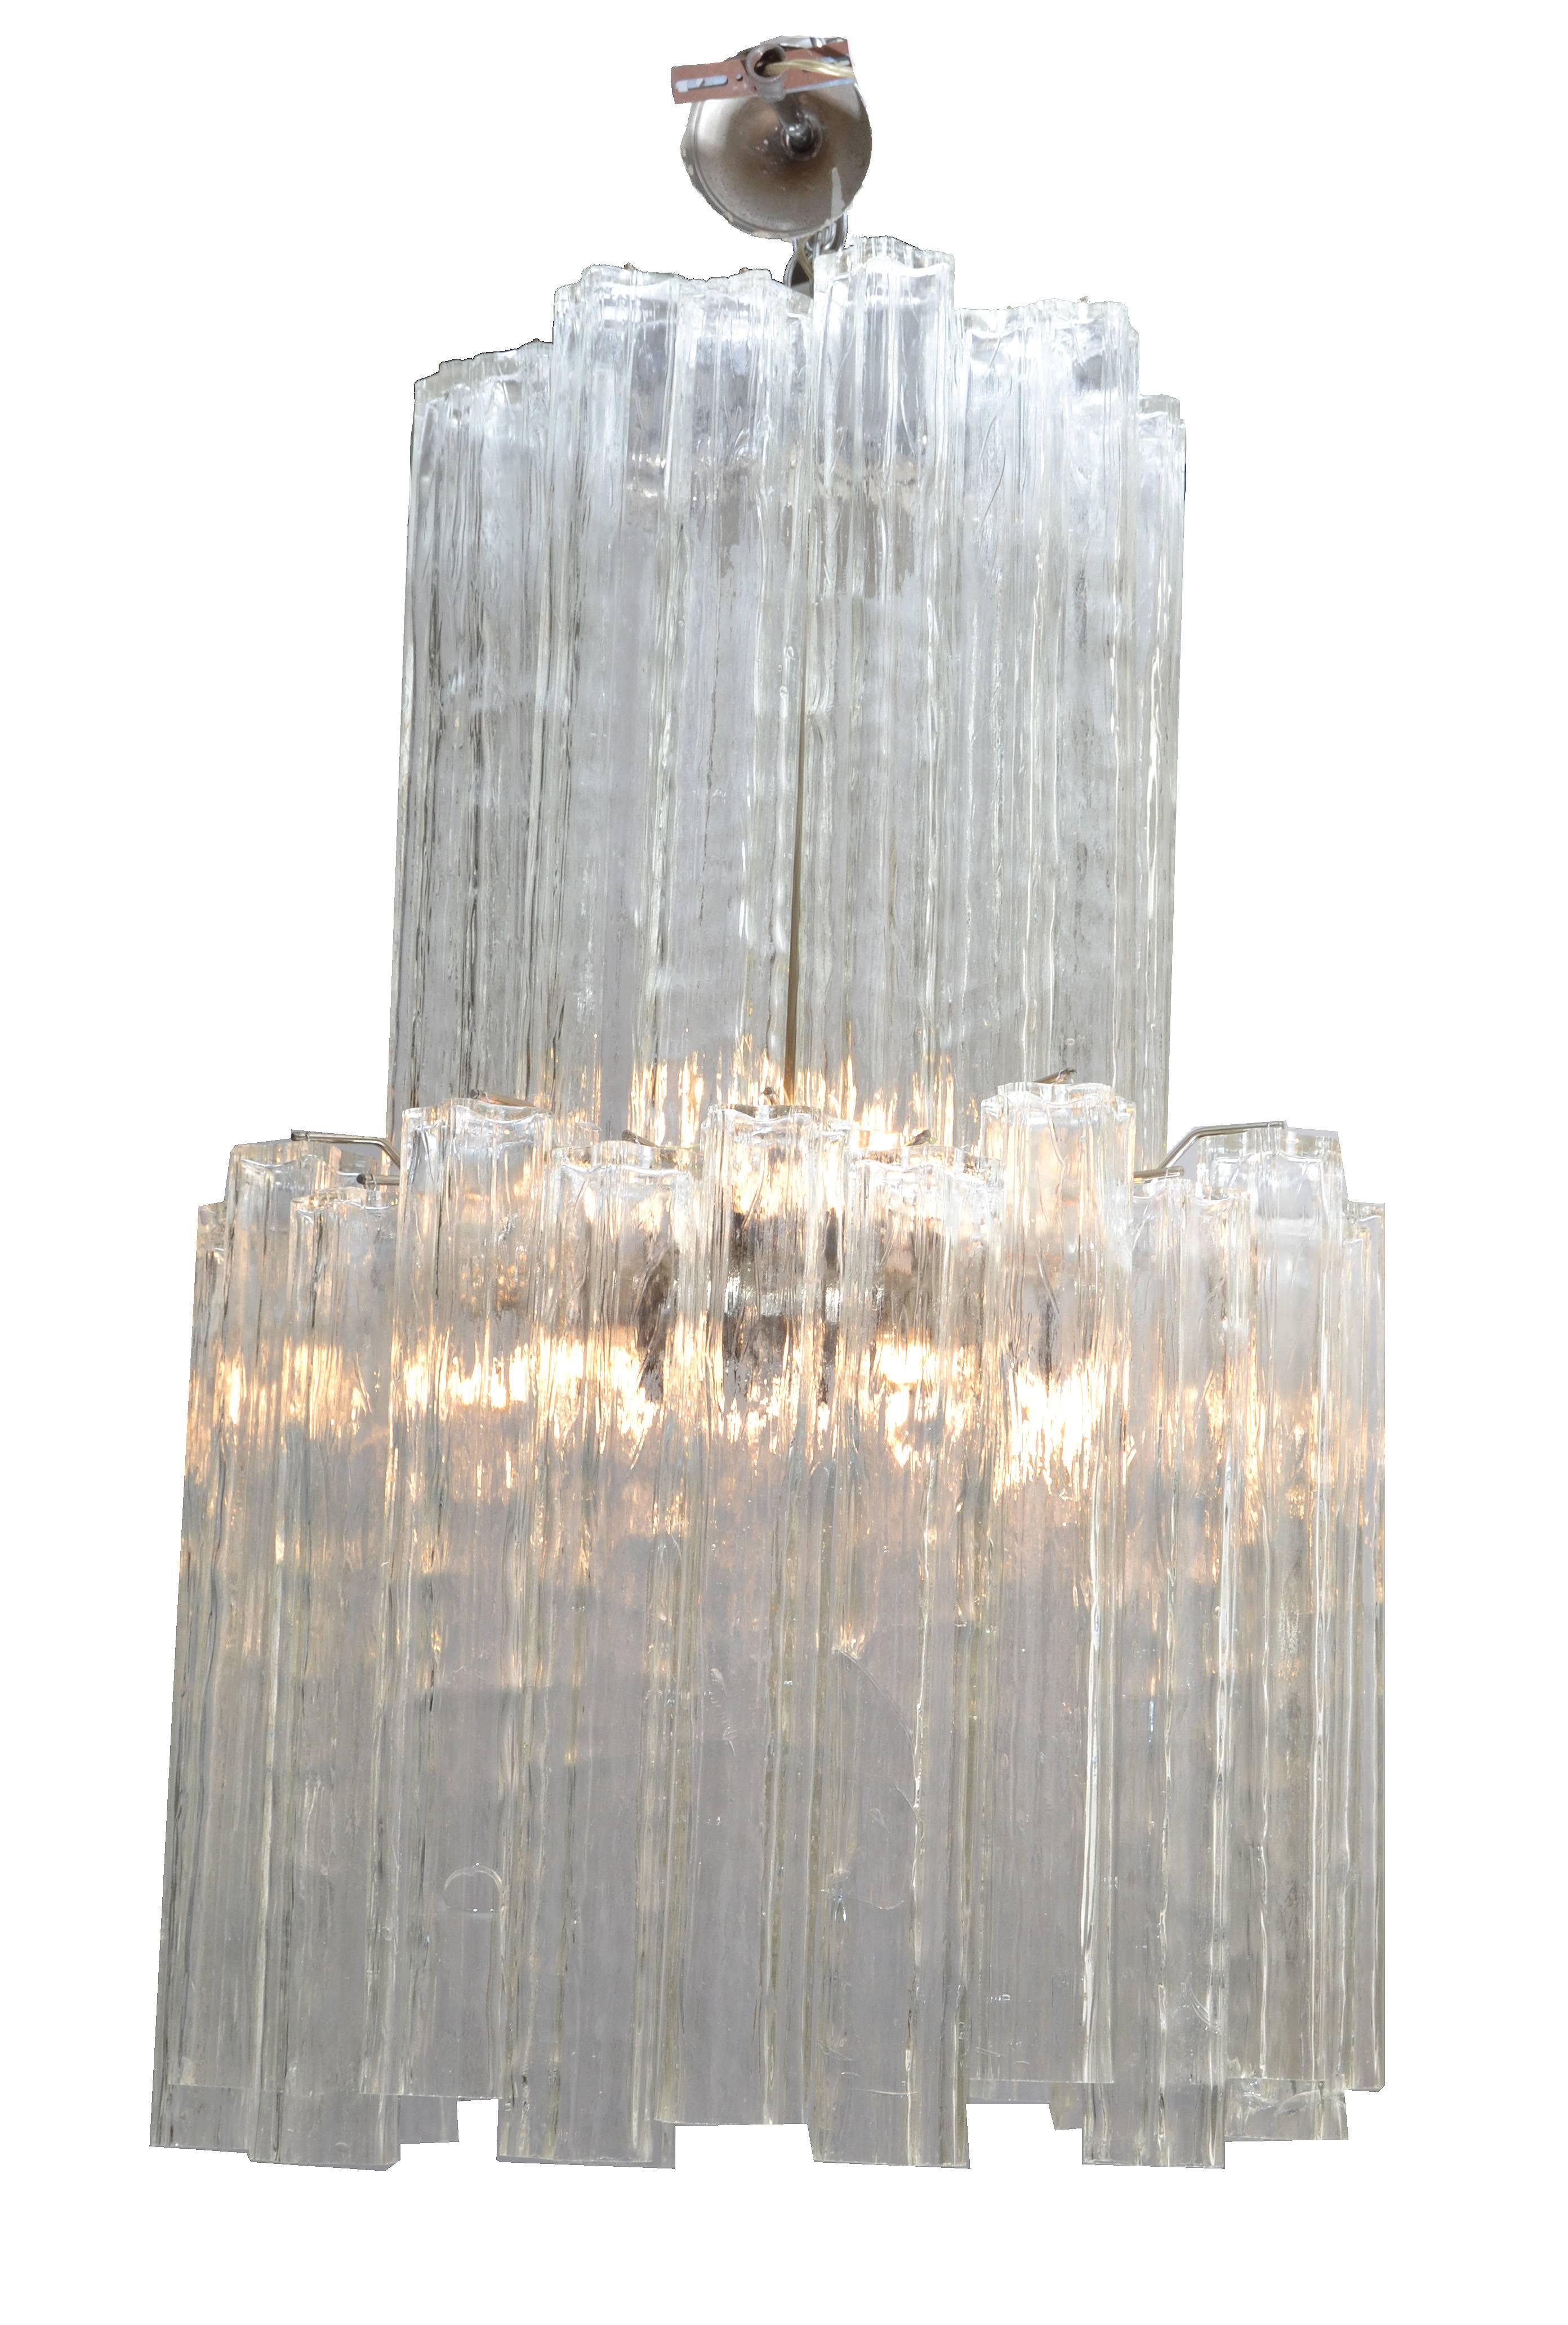 Italian Mid-Century Modern Two-Tier Long Crystal Tronchi Shades Chandelier For Sale 2